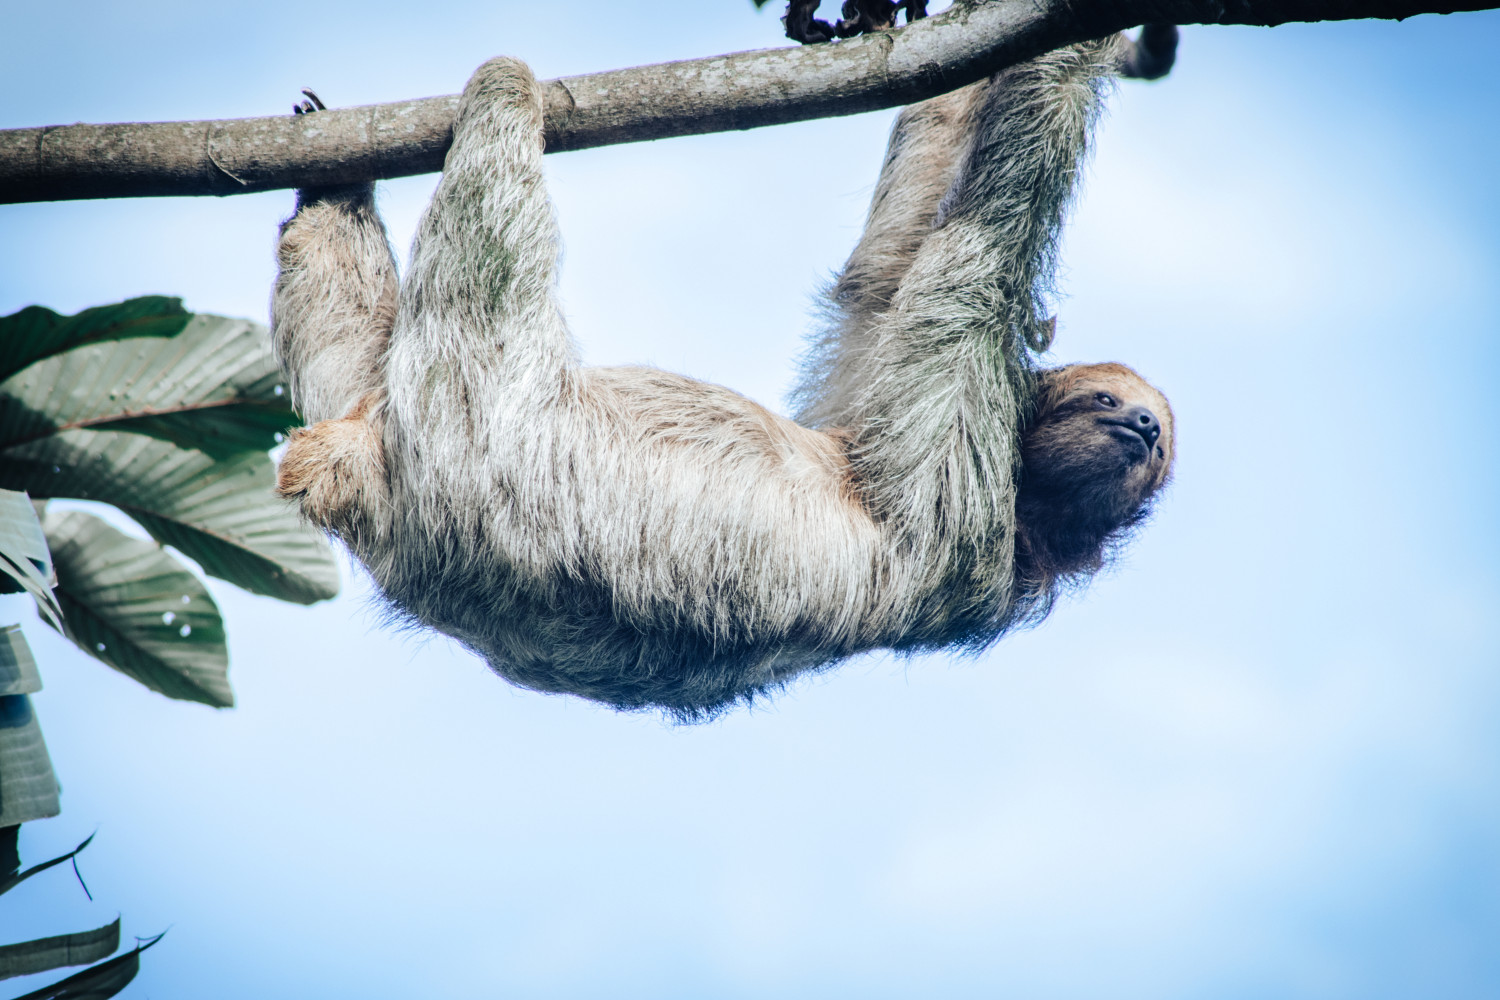 A sloth dangling from a tree branch.